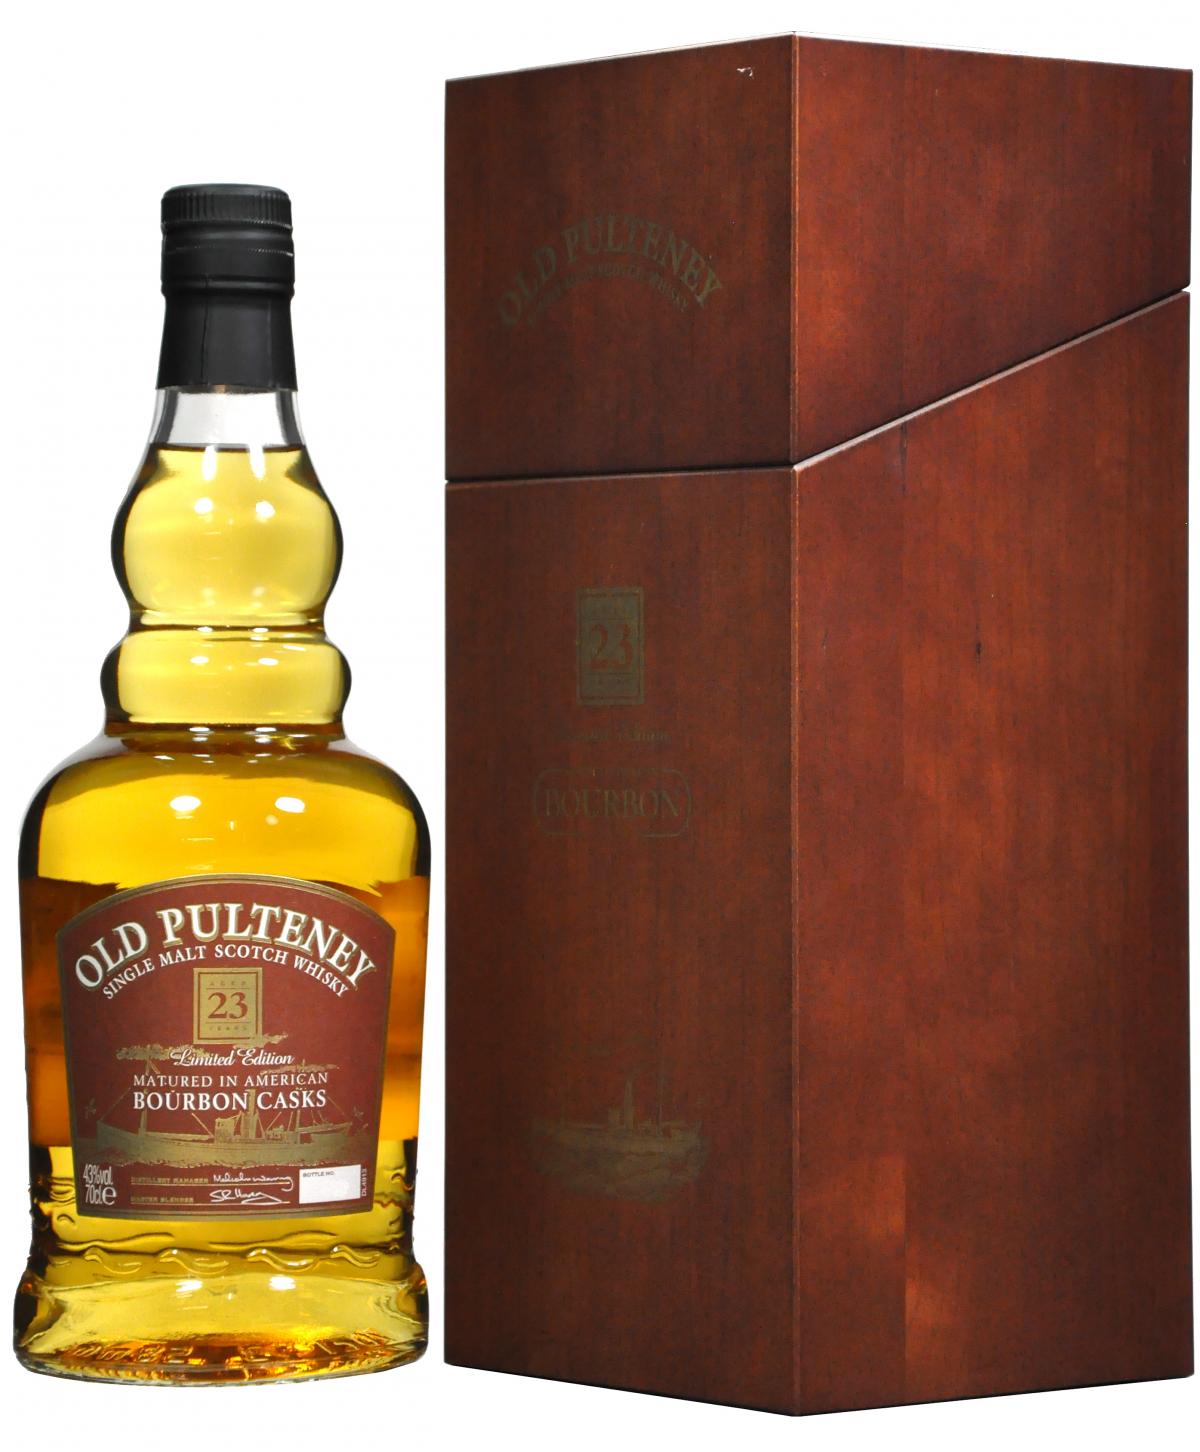 old pulteney 23 year old, limited edition american bourbon casks, highland single malt,scotch whisky whiskey